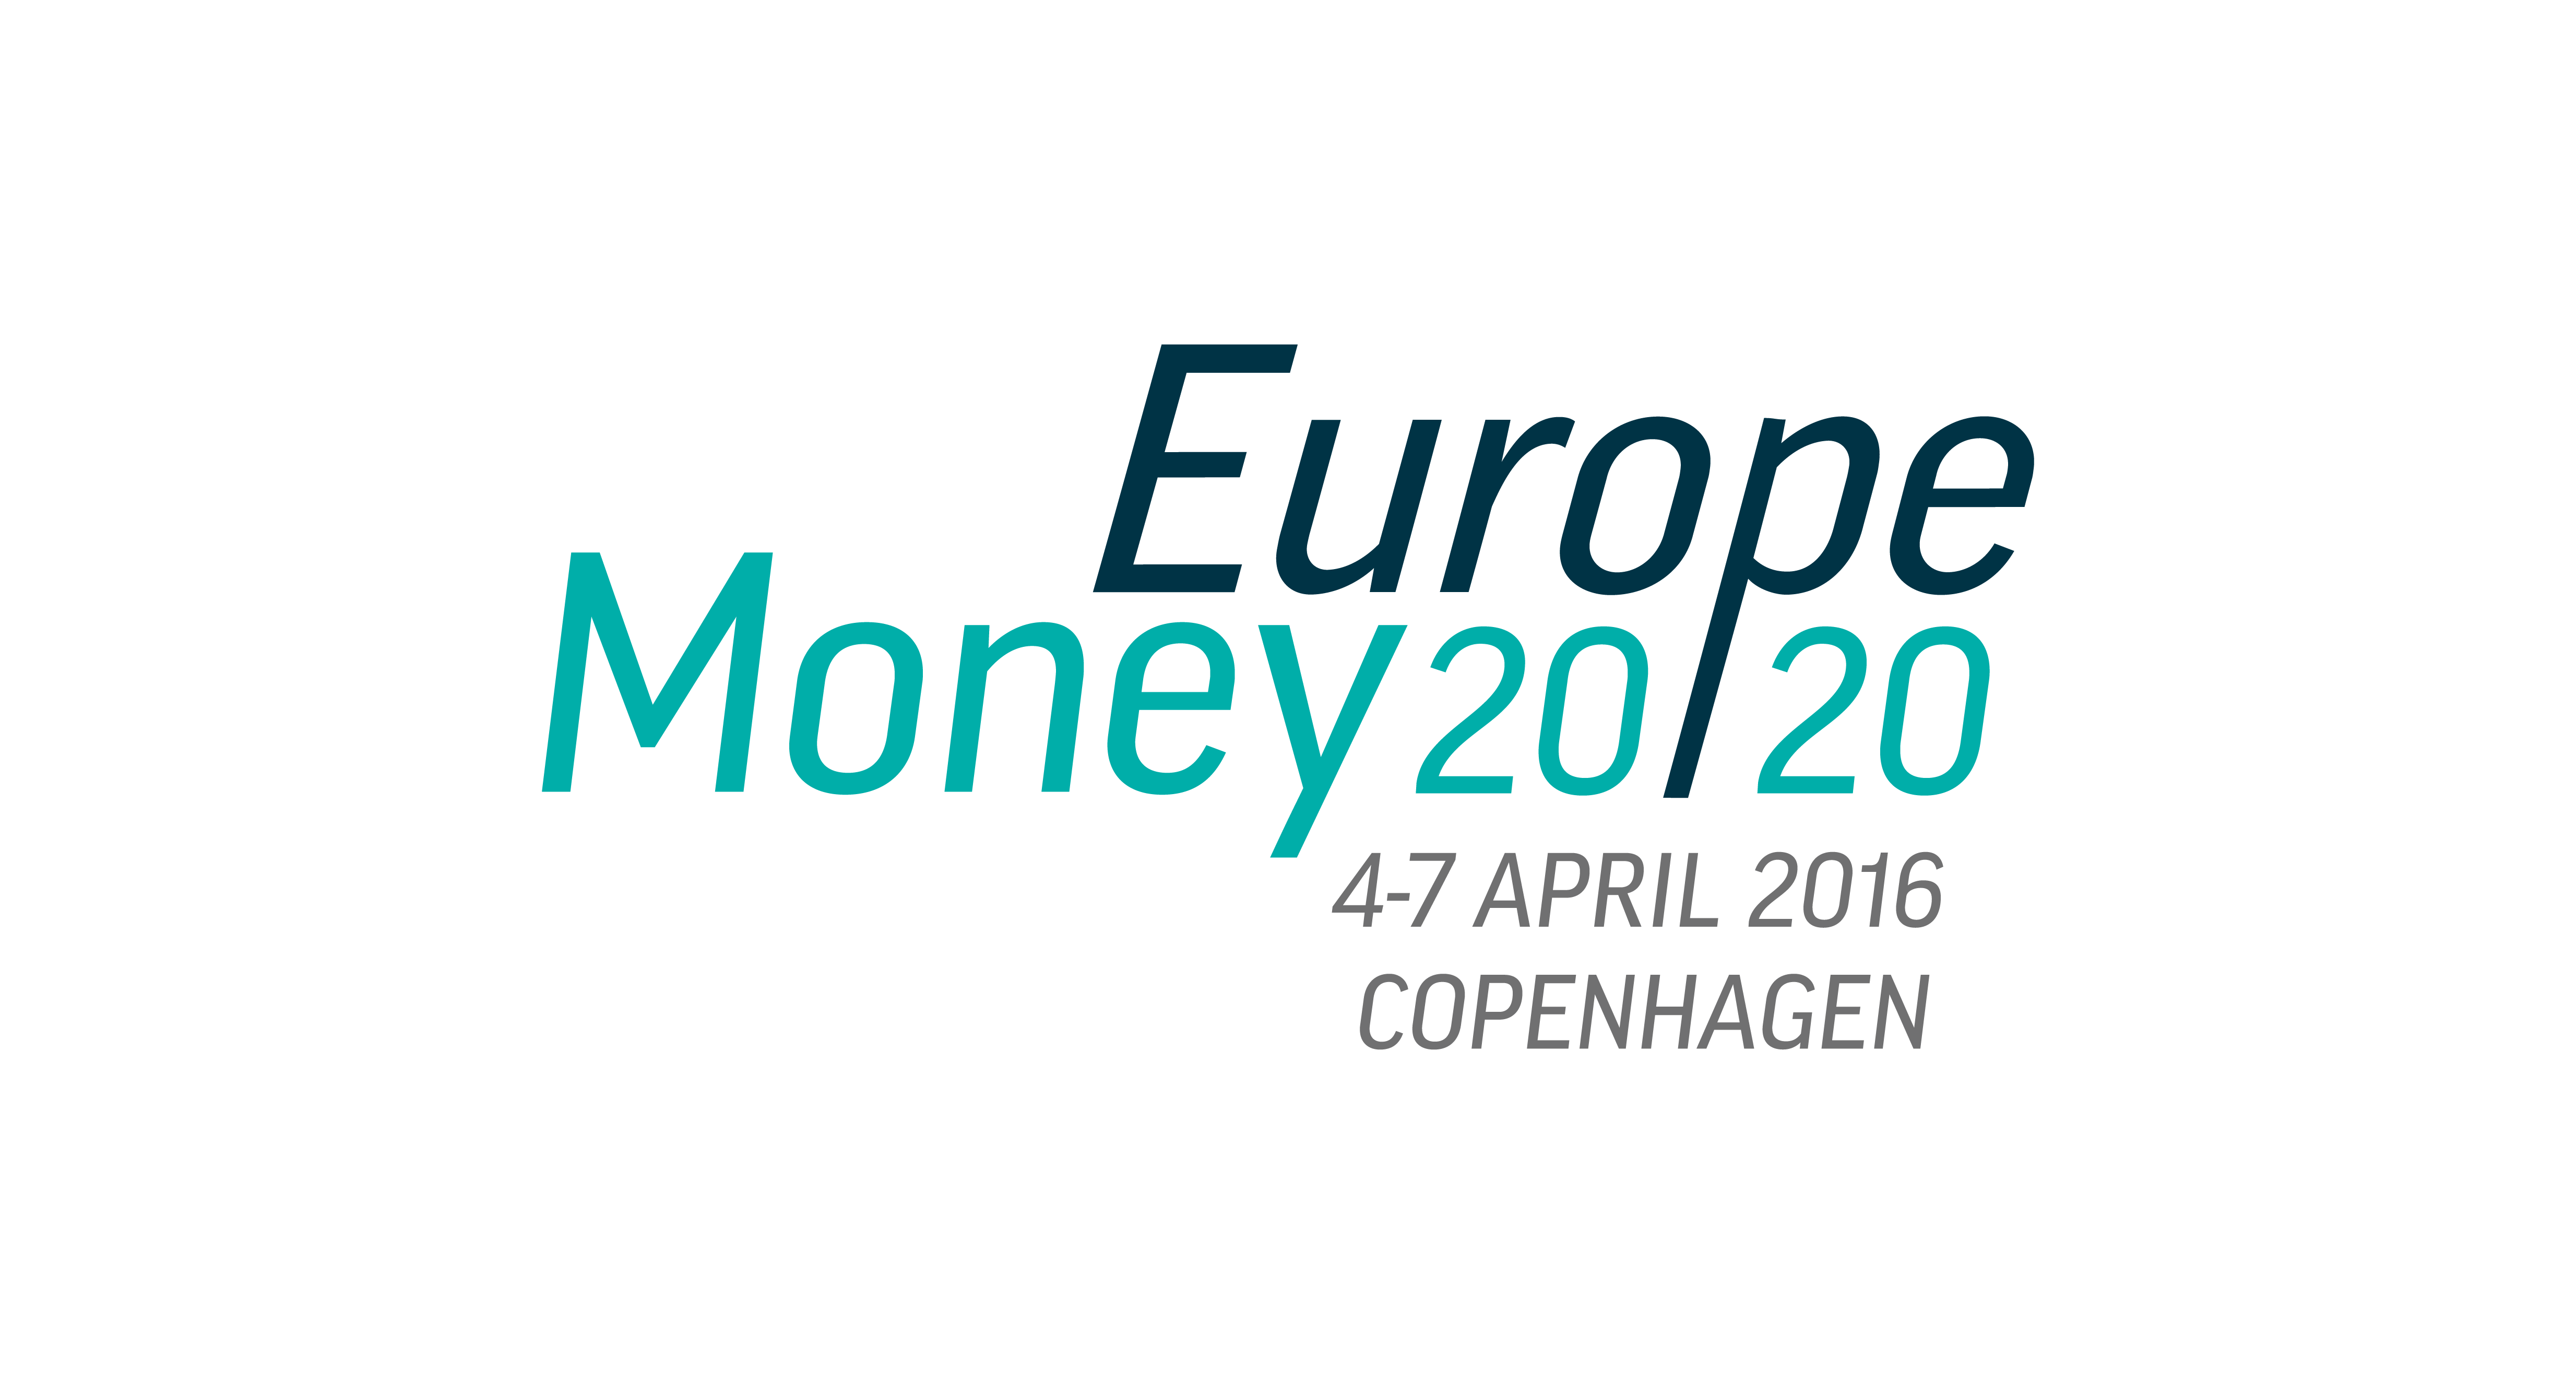 The World’s Largest FinTech and Payments event is coming to Europe!